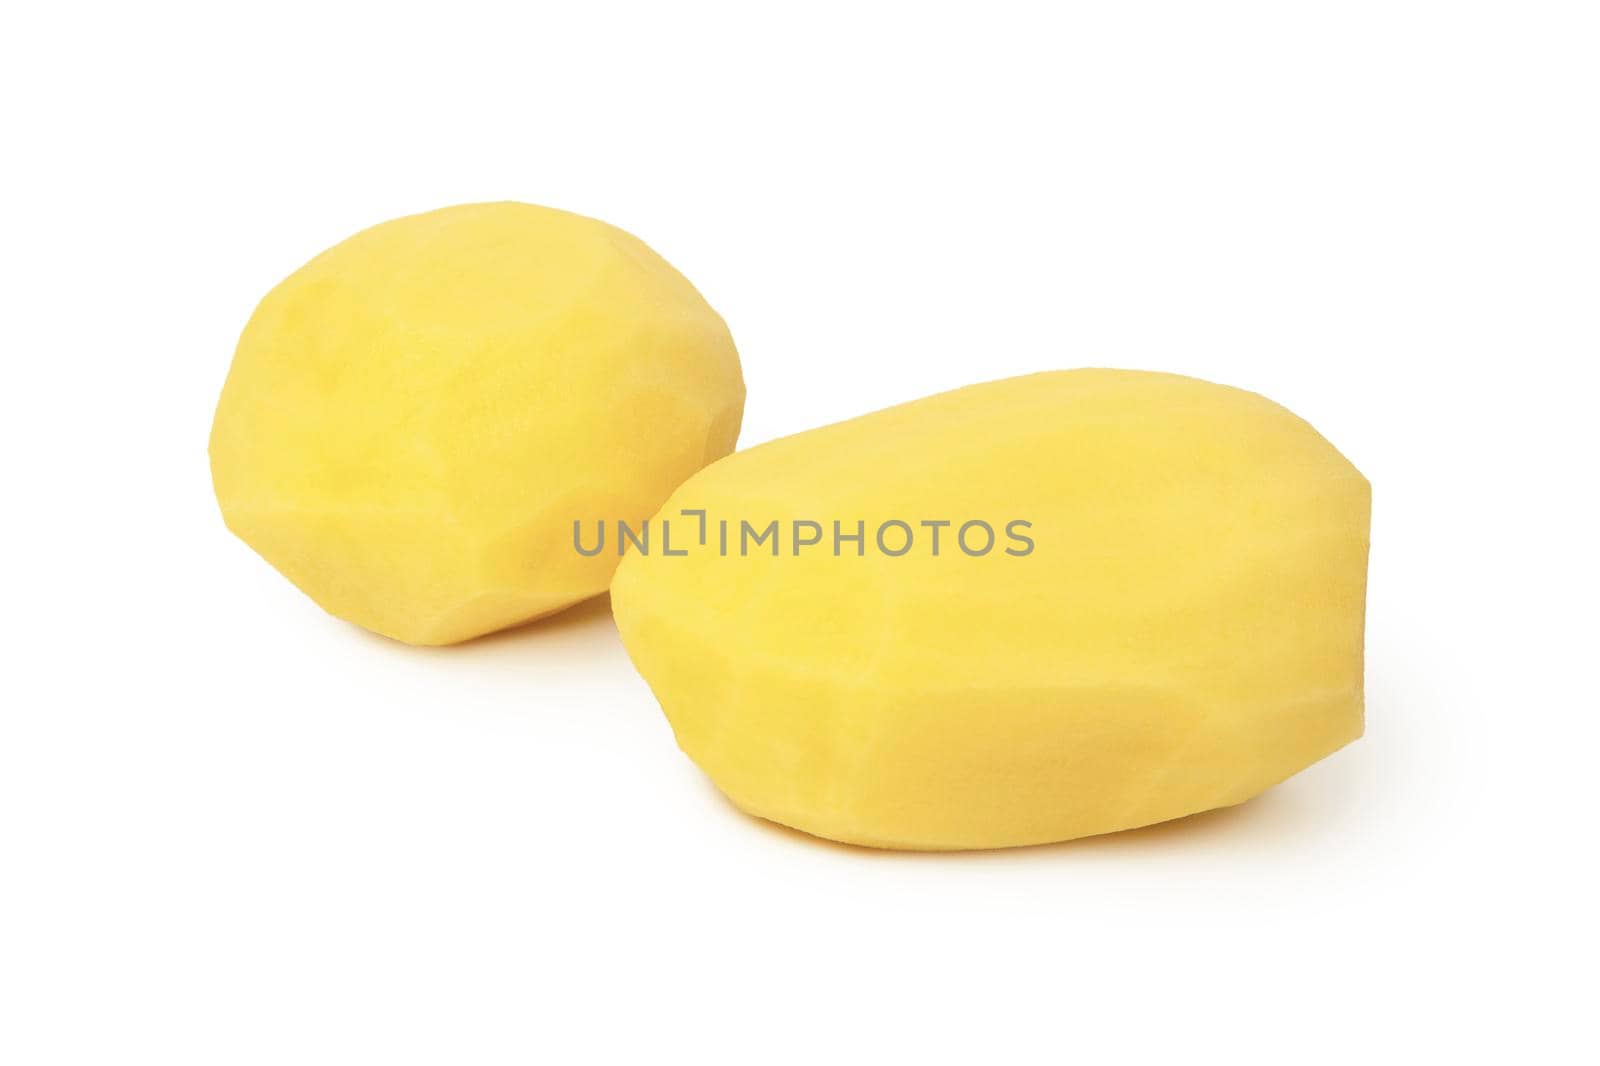 Raw peeled potato isolated on white background. With clipping path